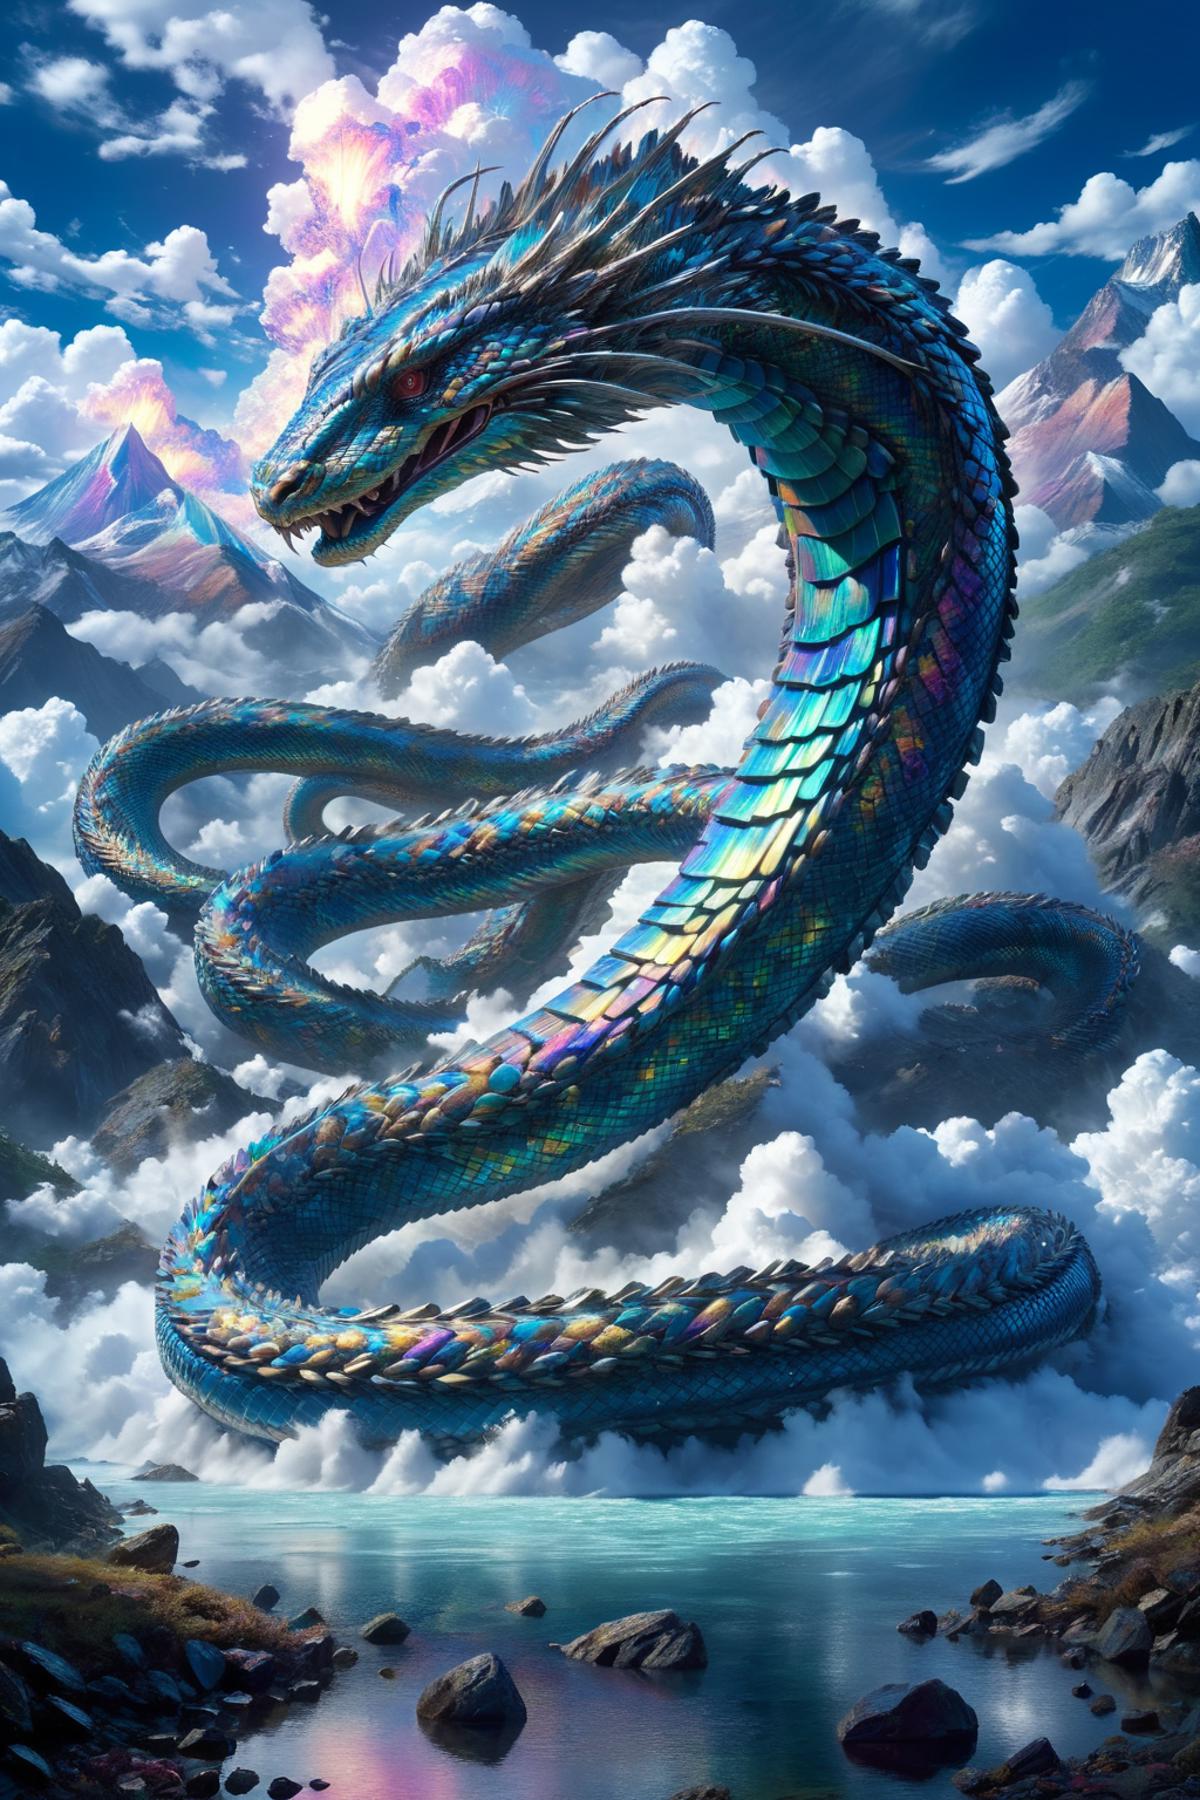 A vibrant blue and green dragon with a rainbow-colored body, sitting on top of a mountain and surrounded by clouds.